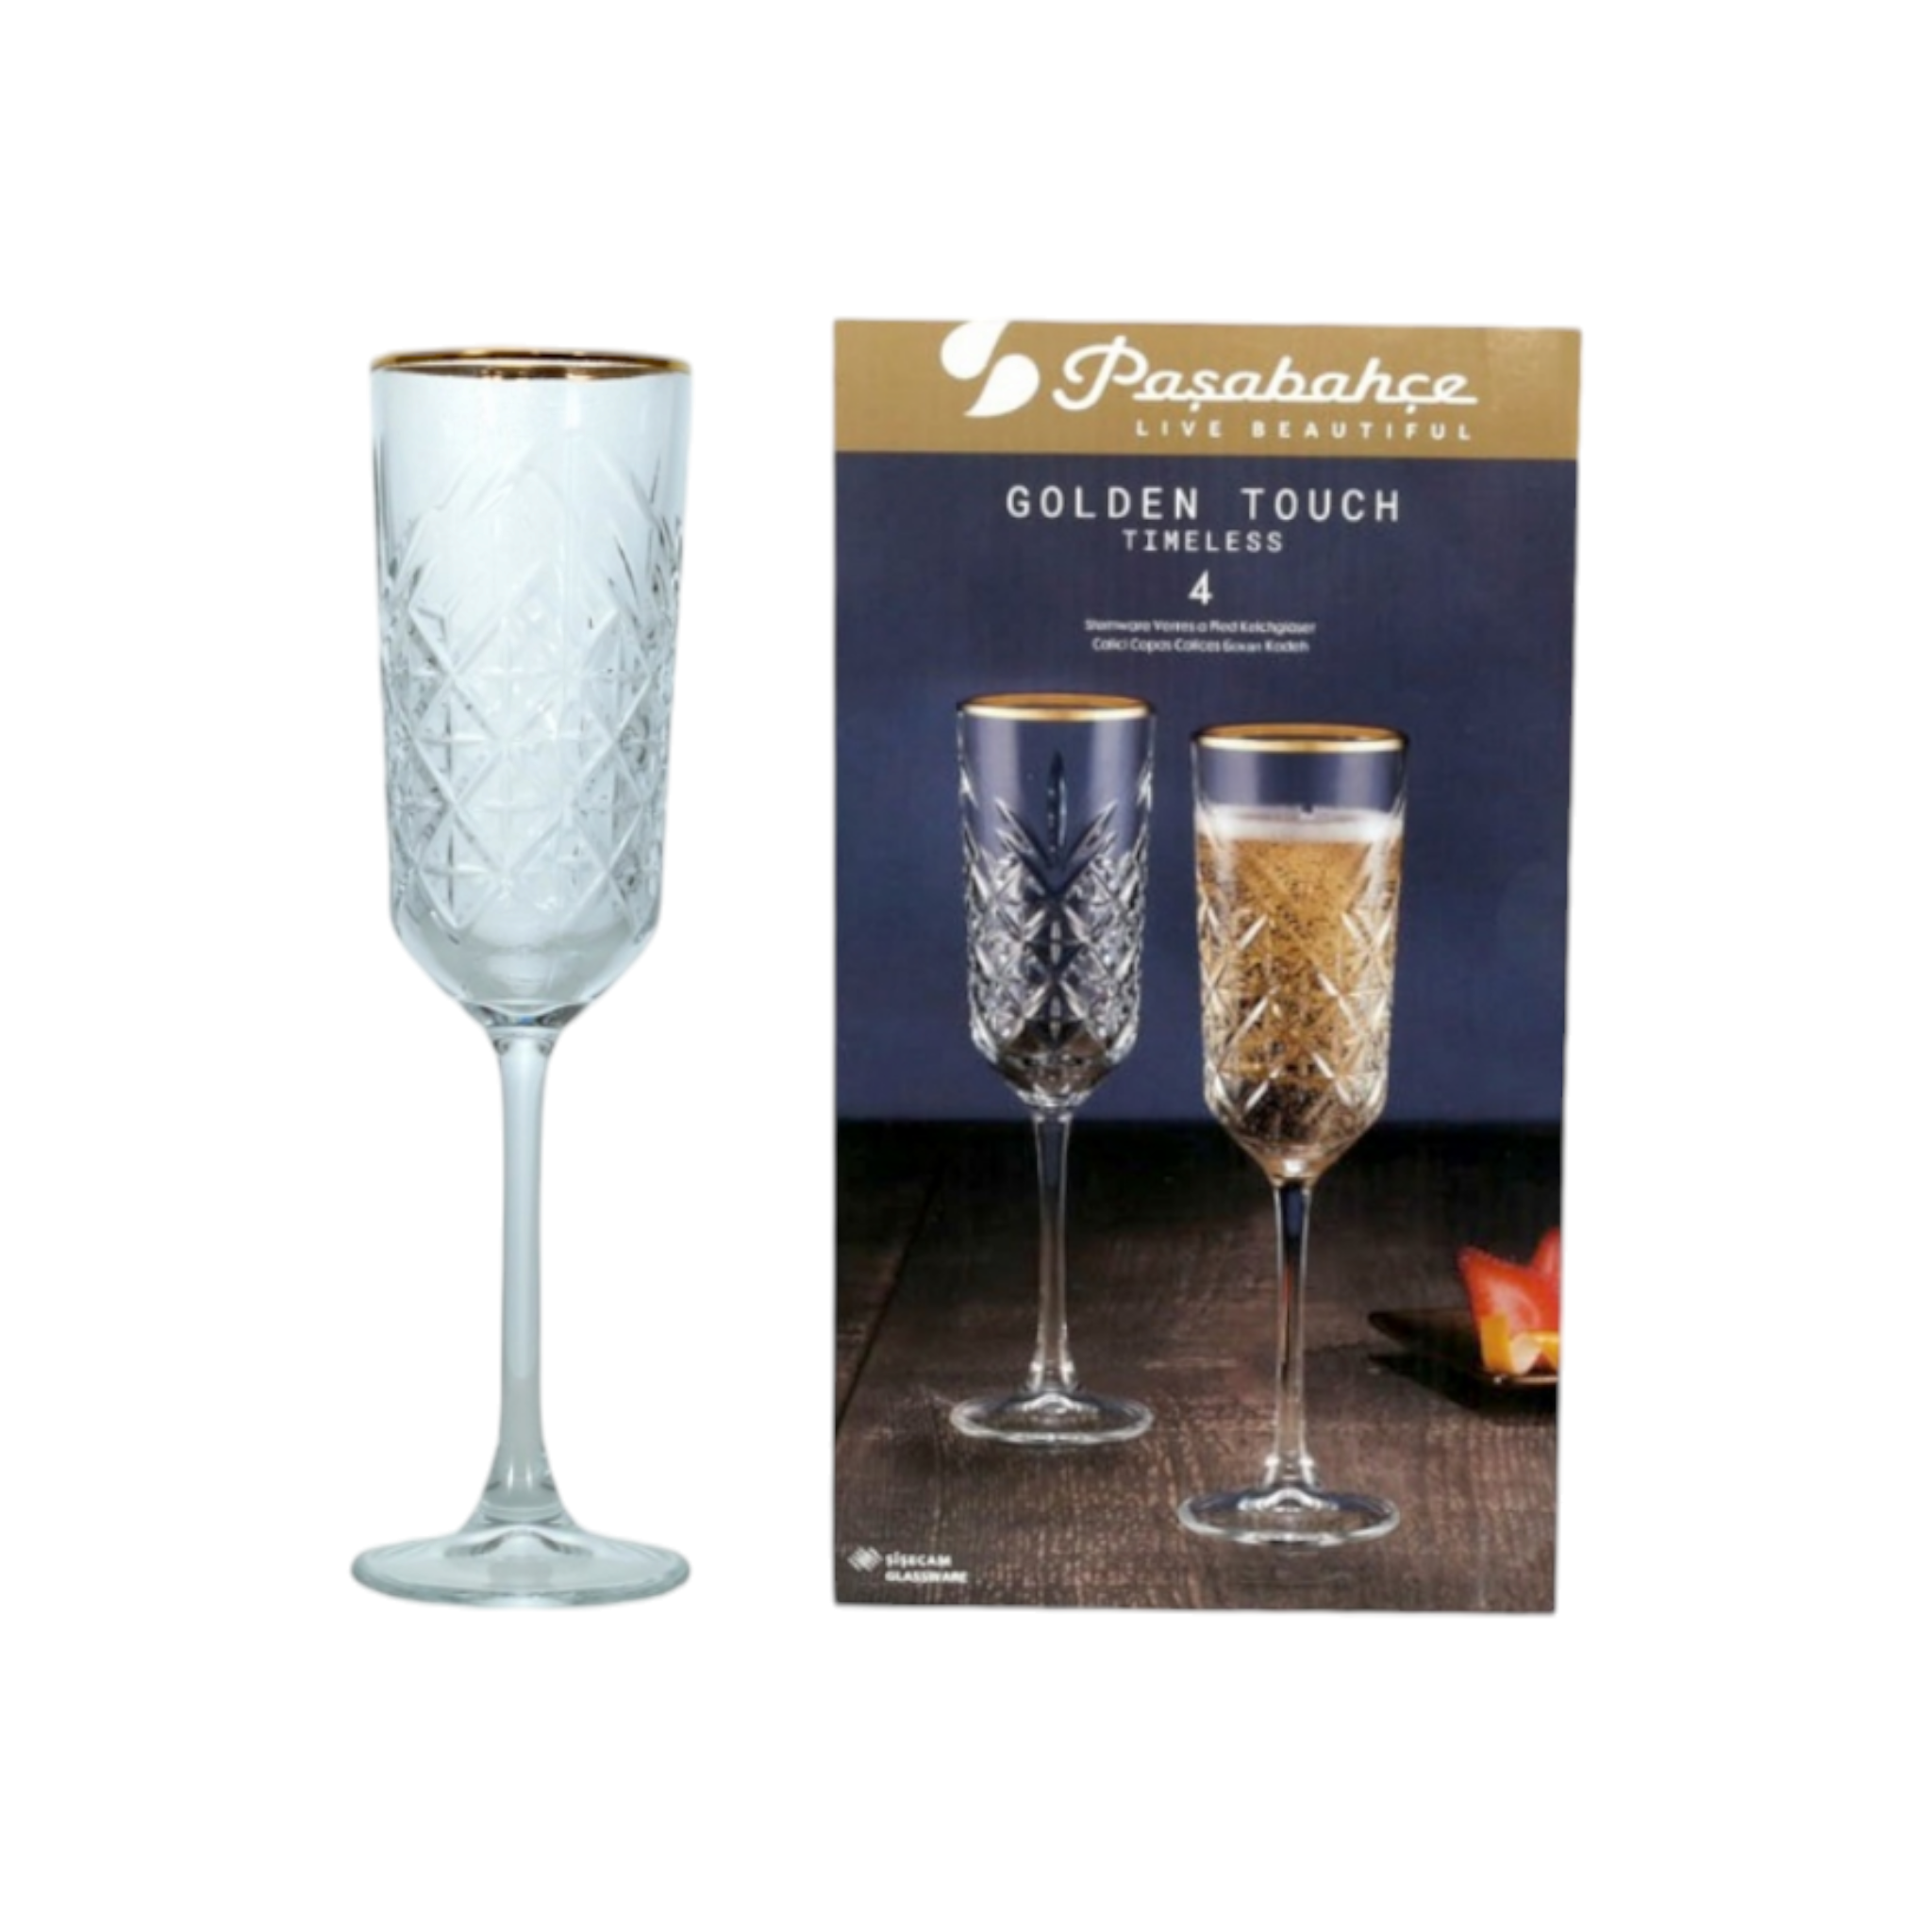 Pasabahce Timeless Glass Tumbler Stemmed 175ml Champagne with Gold Rim 4pcs